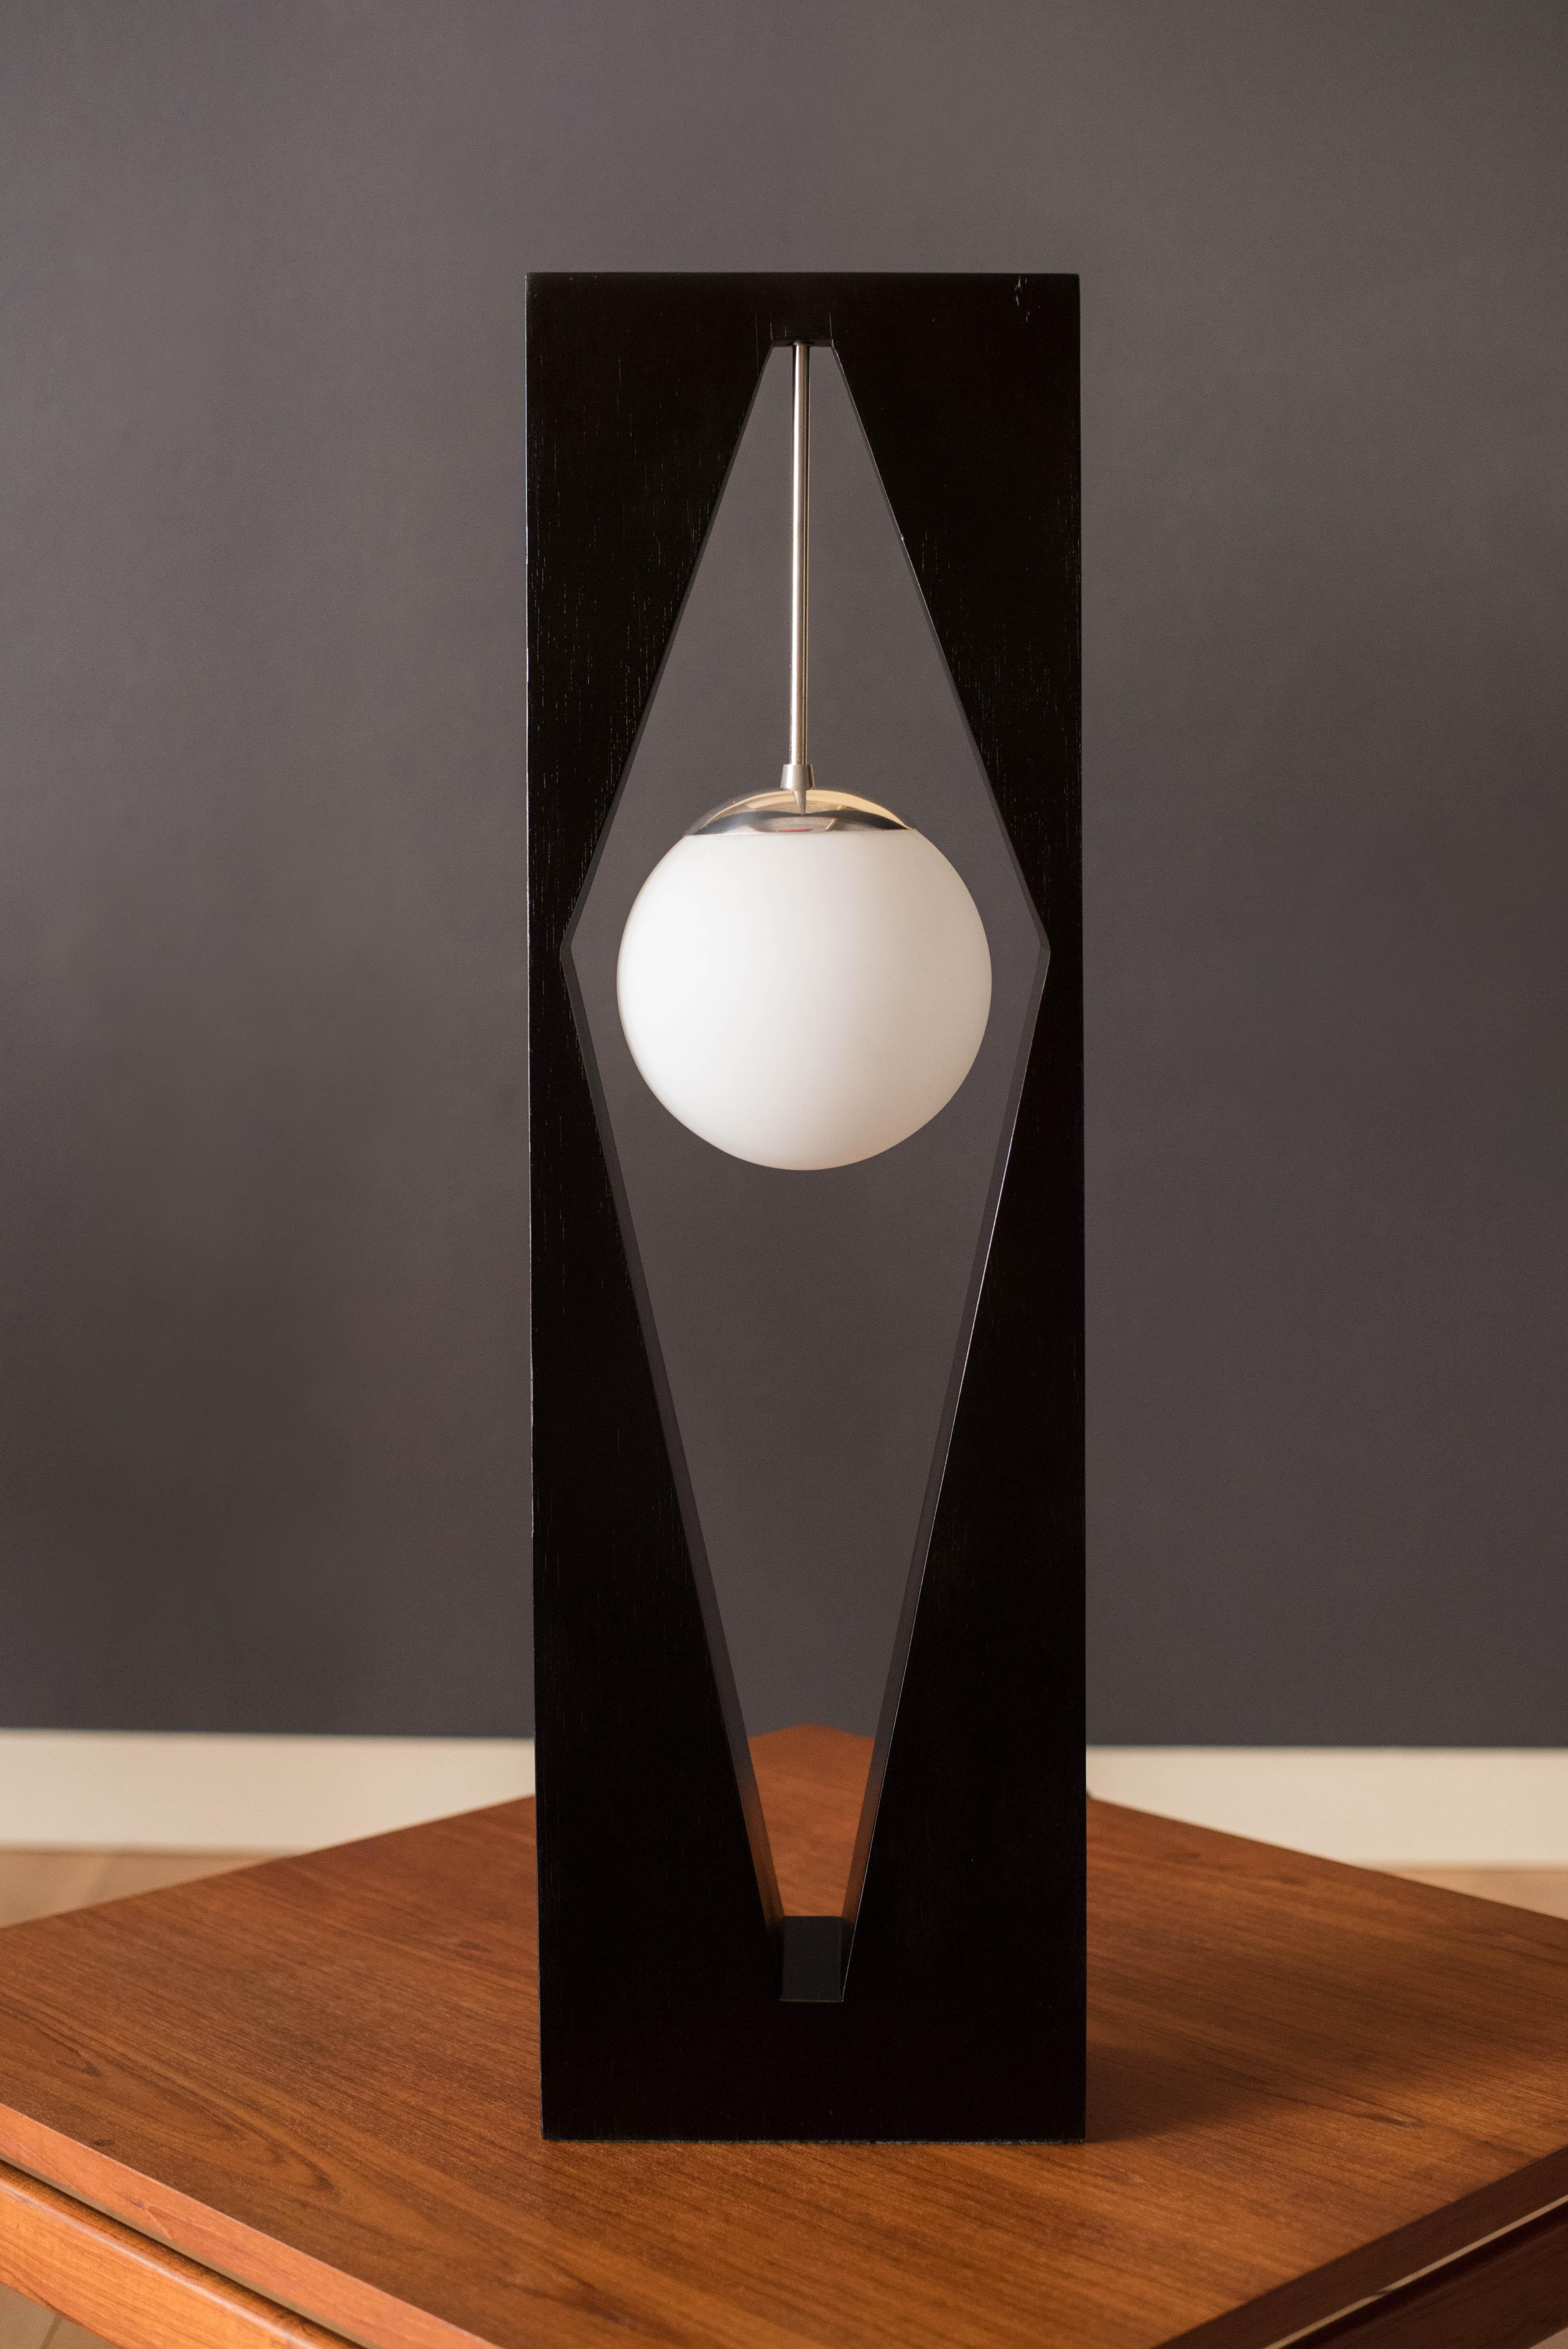 Mid-Century Modern accent table lamp manufactured by Modeline of California, circa 1970's. This unique piece will light up any space featuring a suspended frosted glass globe accented in chrome hardware and supported by a geometric black lacquered